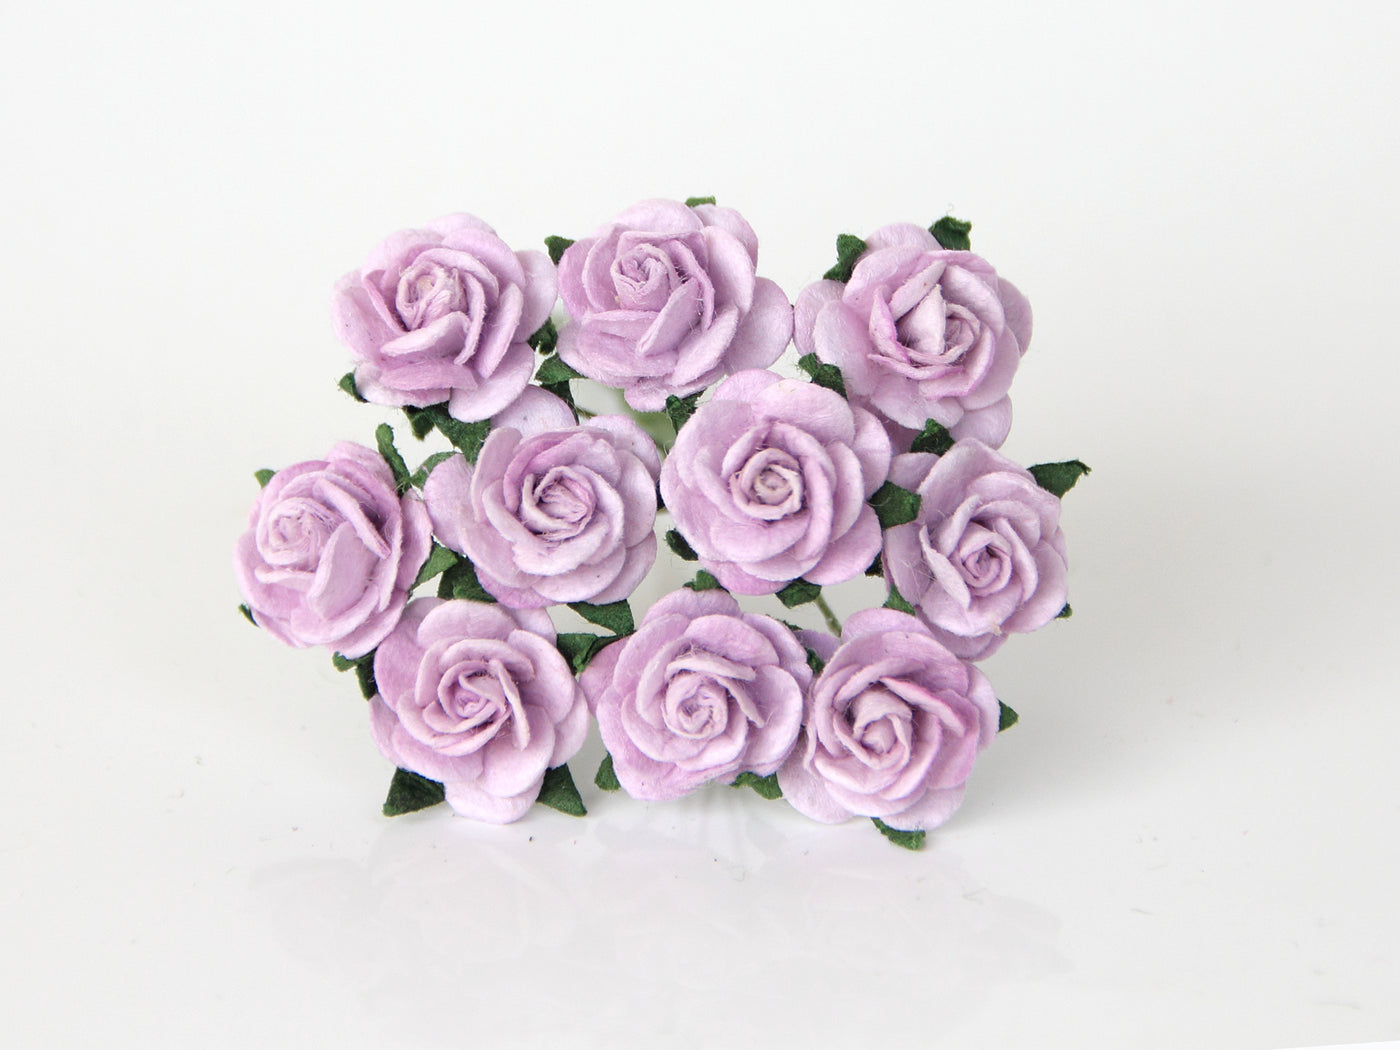 10 Pcs - Mulberry Paper Flowers - 1.5cm Rounded Petal Roses - Soft Lilac